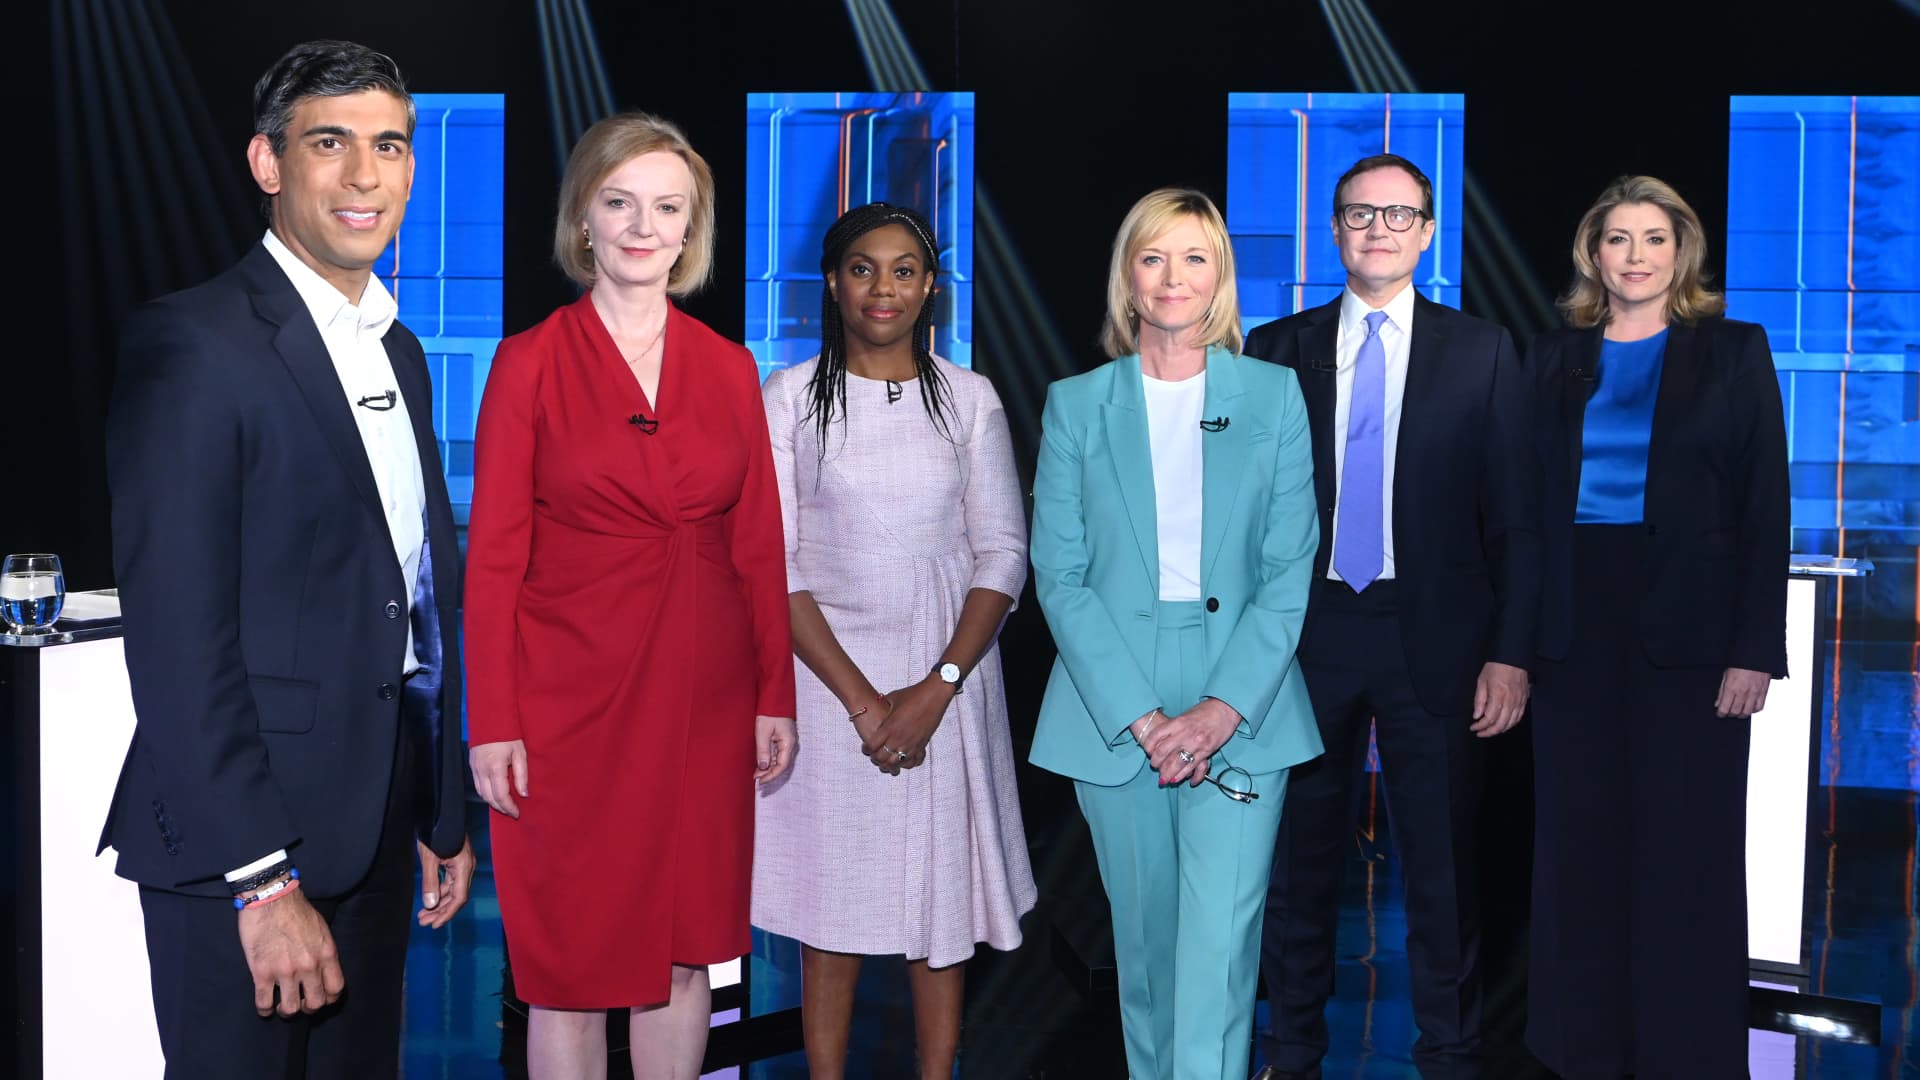 In this handout image provided by ITV, Conservative leadership candidates Rishi Sunak, Liz Truss, Kemi Badenoch, Tom Tugendhat and Penny Mordaunt stand with presenter Julie Etchingham (in the light blue suit) during Britain's Next Prime Minister: The ITV Debate at Riverside Studios on July 17, 2022 in London, England.